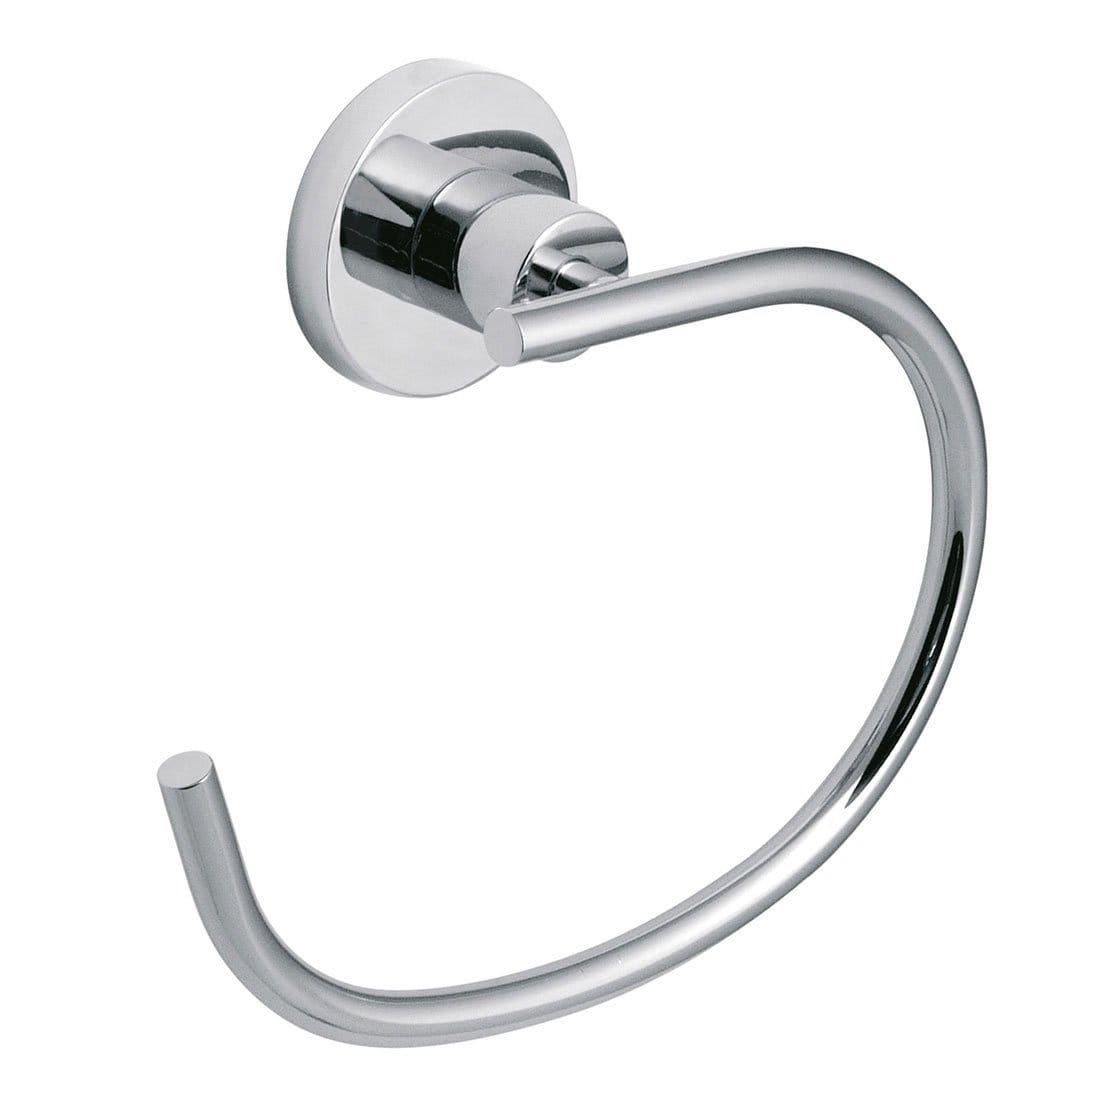 Vado Elements Wall Mounted Towel Ring - ELE-181-C/P | Supply Master | Accra, Ghana Building Material Building Steel Engineering Hardware tool